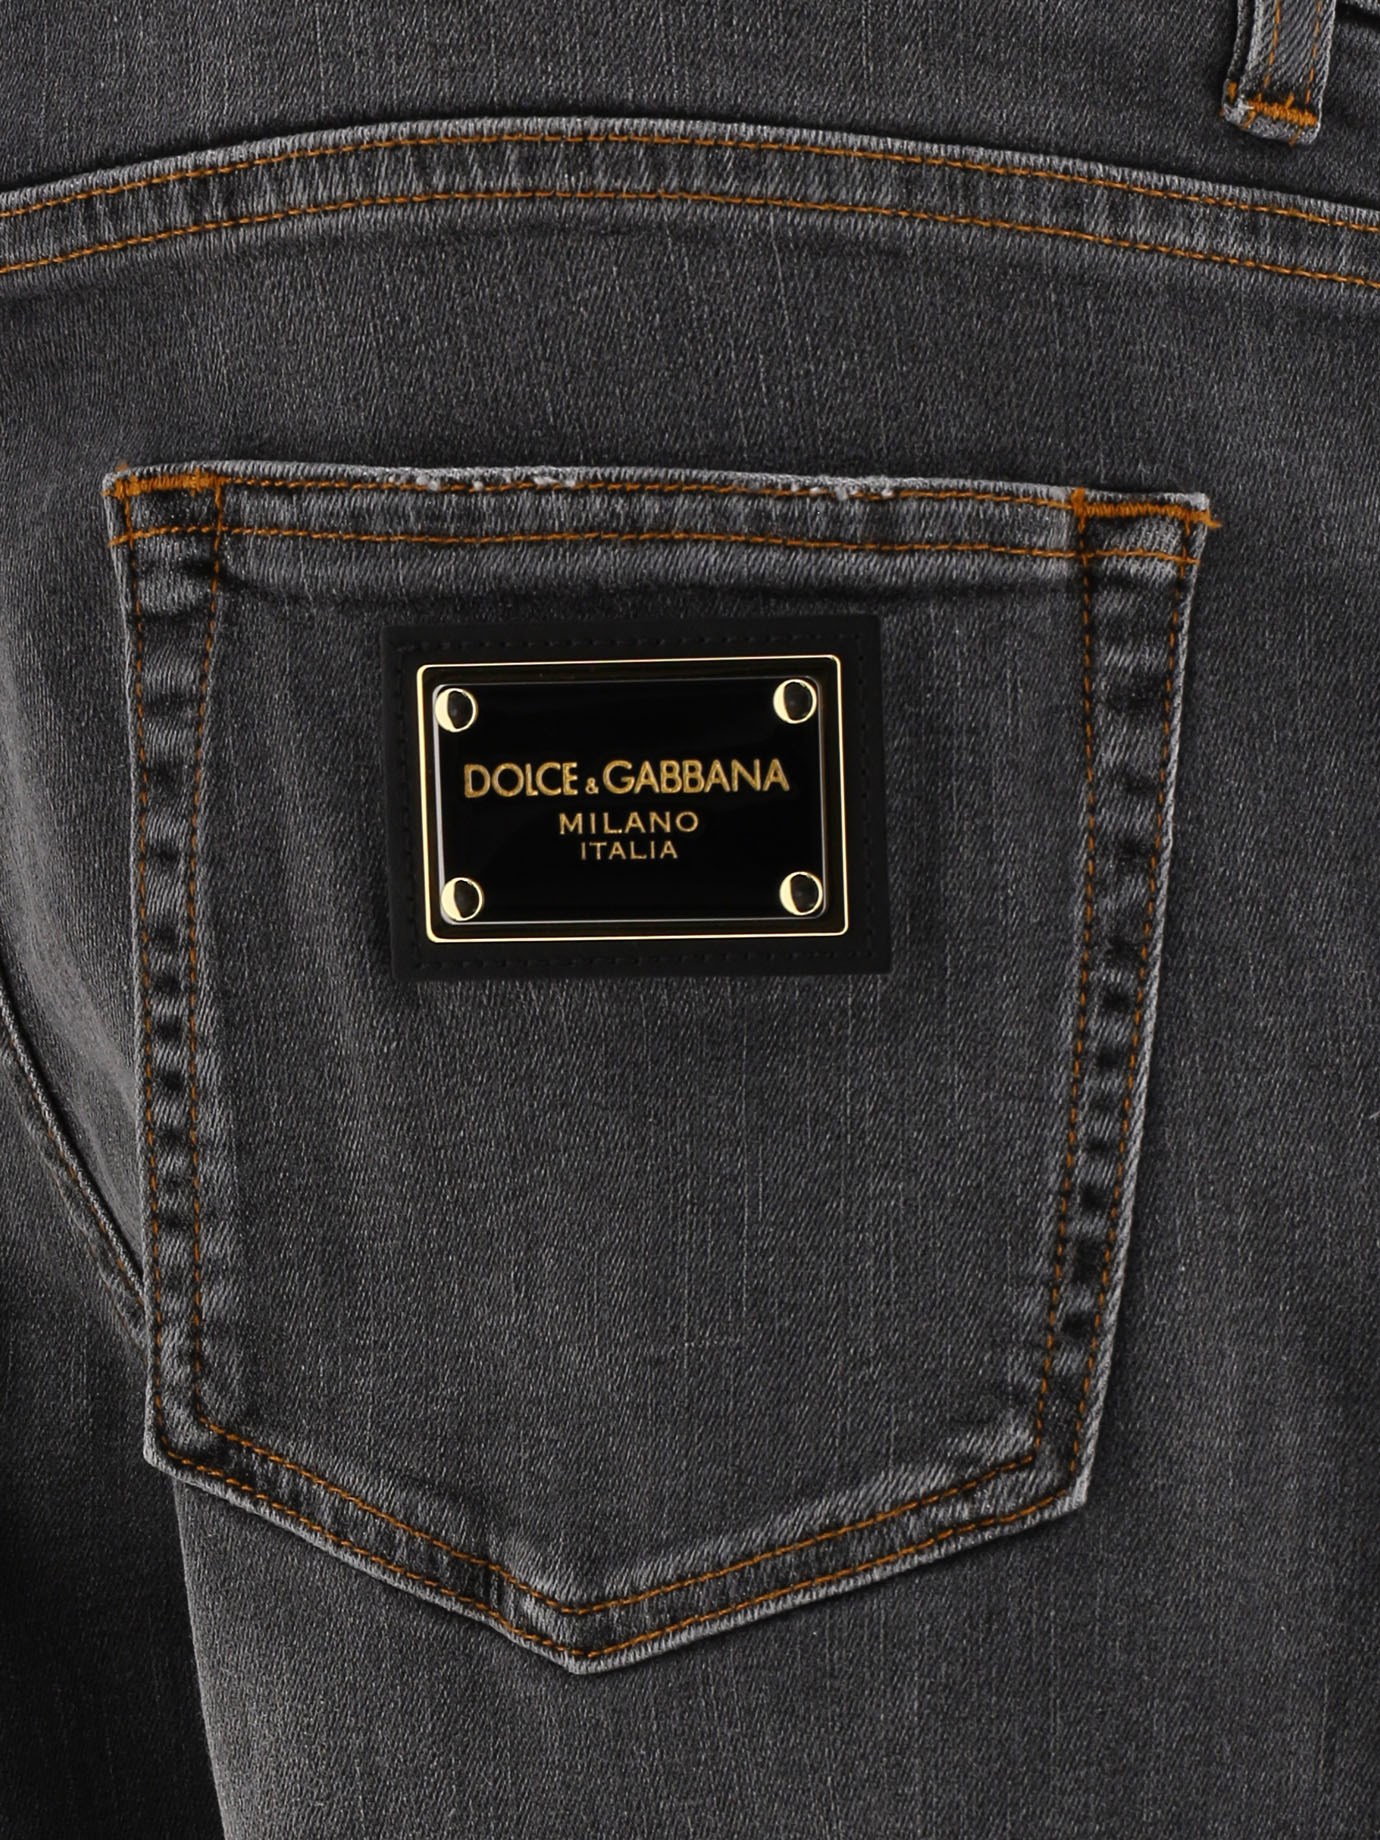 Jeans with plaque by Dolce & Gabbana